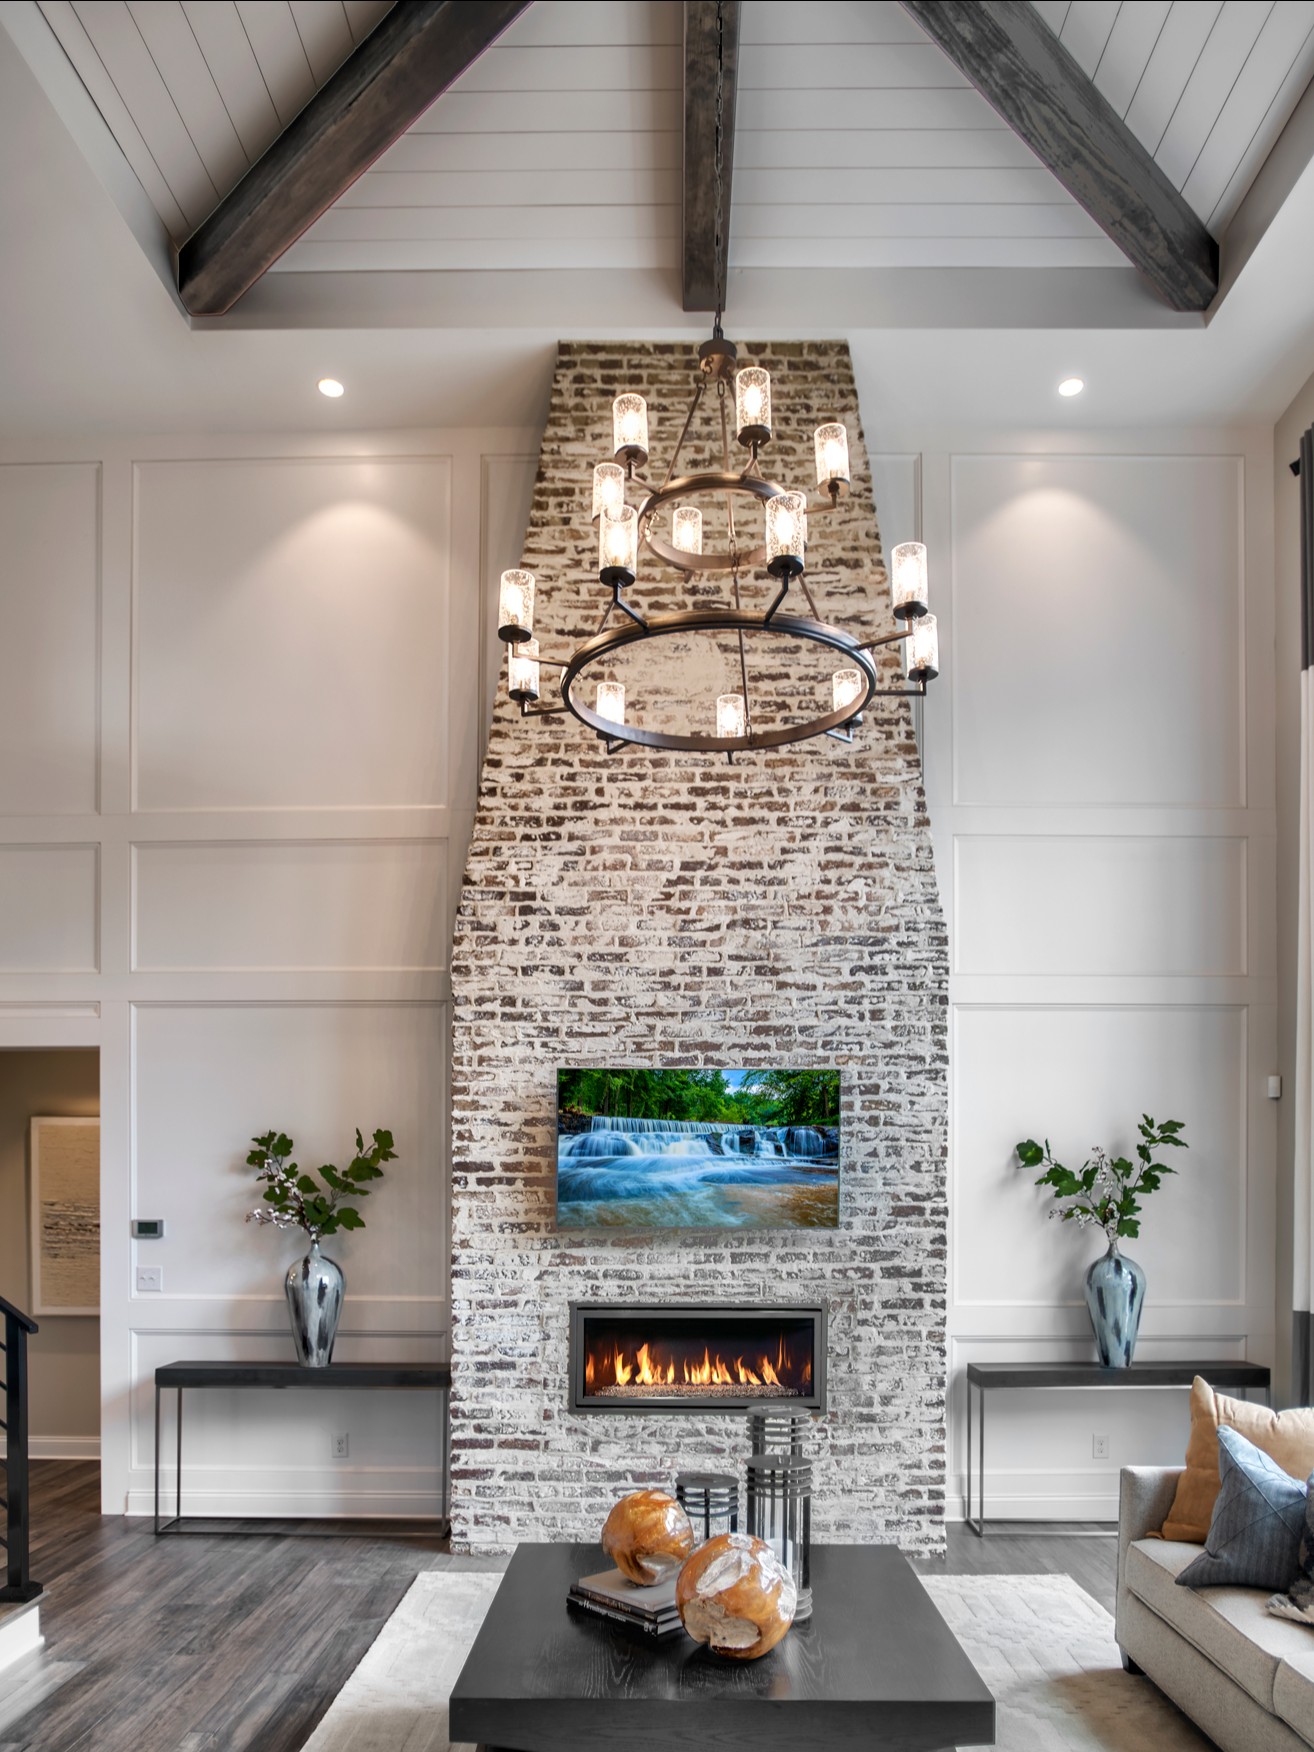 No Problems with Schumacher Homes Fireplace